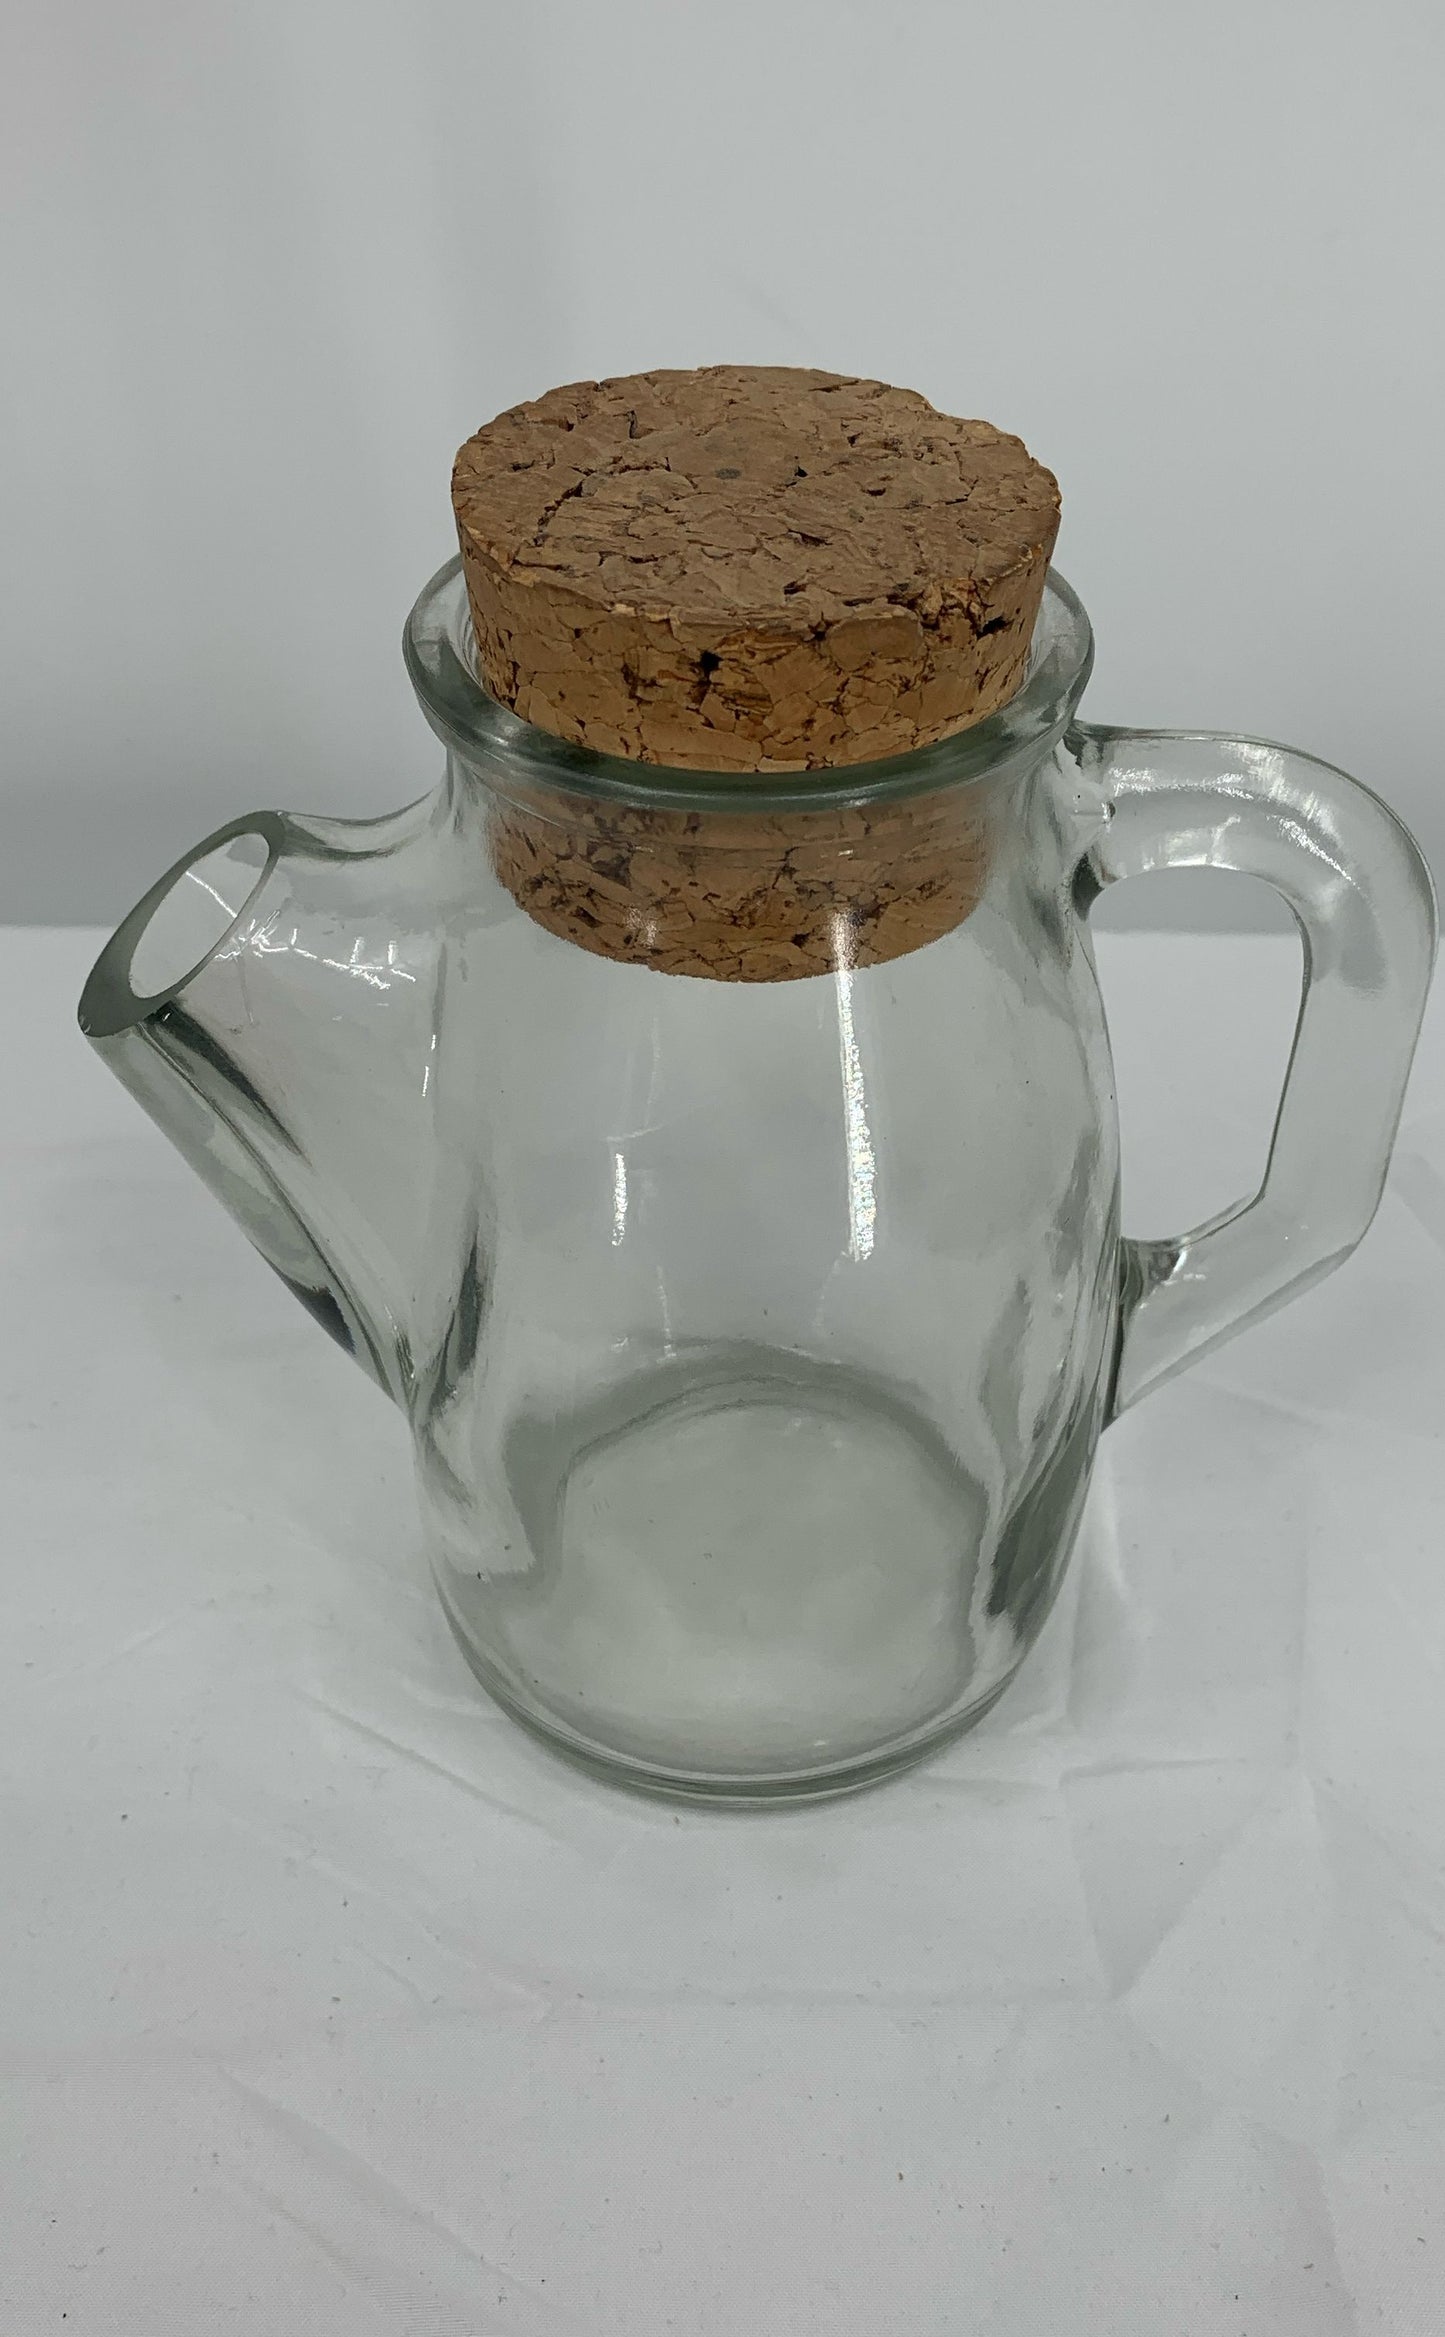 Vintage Westmoreland Glass Snub Nose Pitcher With Cork-Portugal Printed On Cork